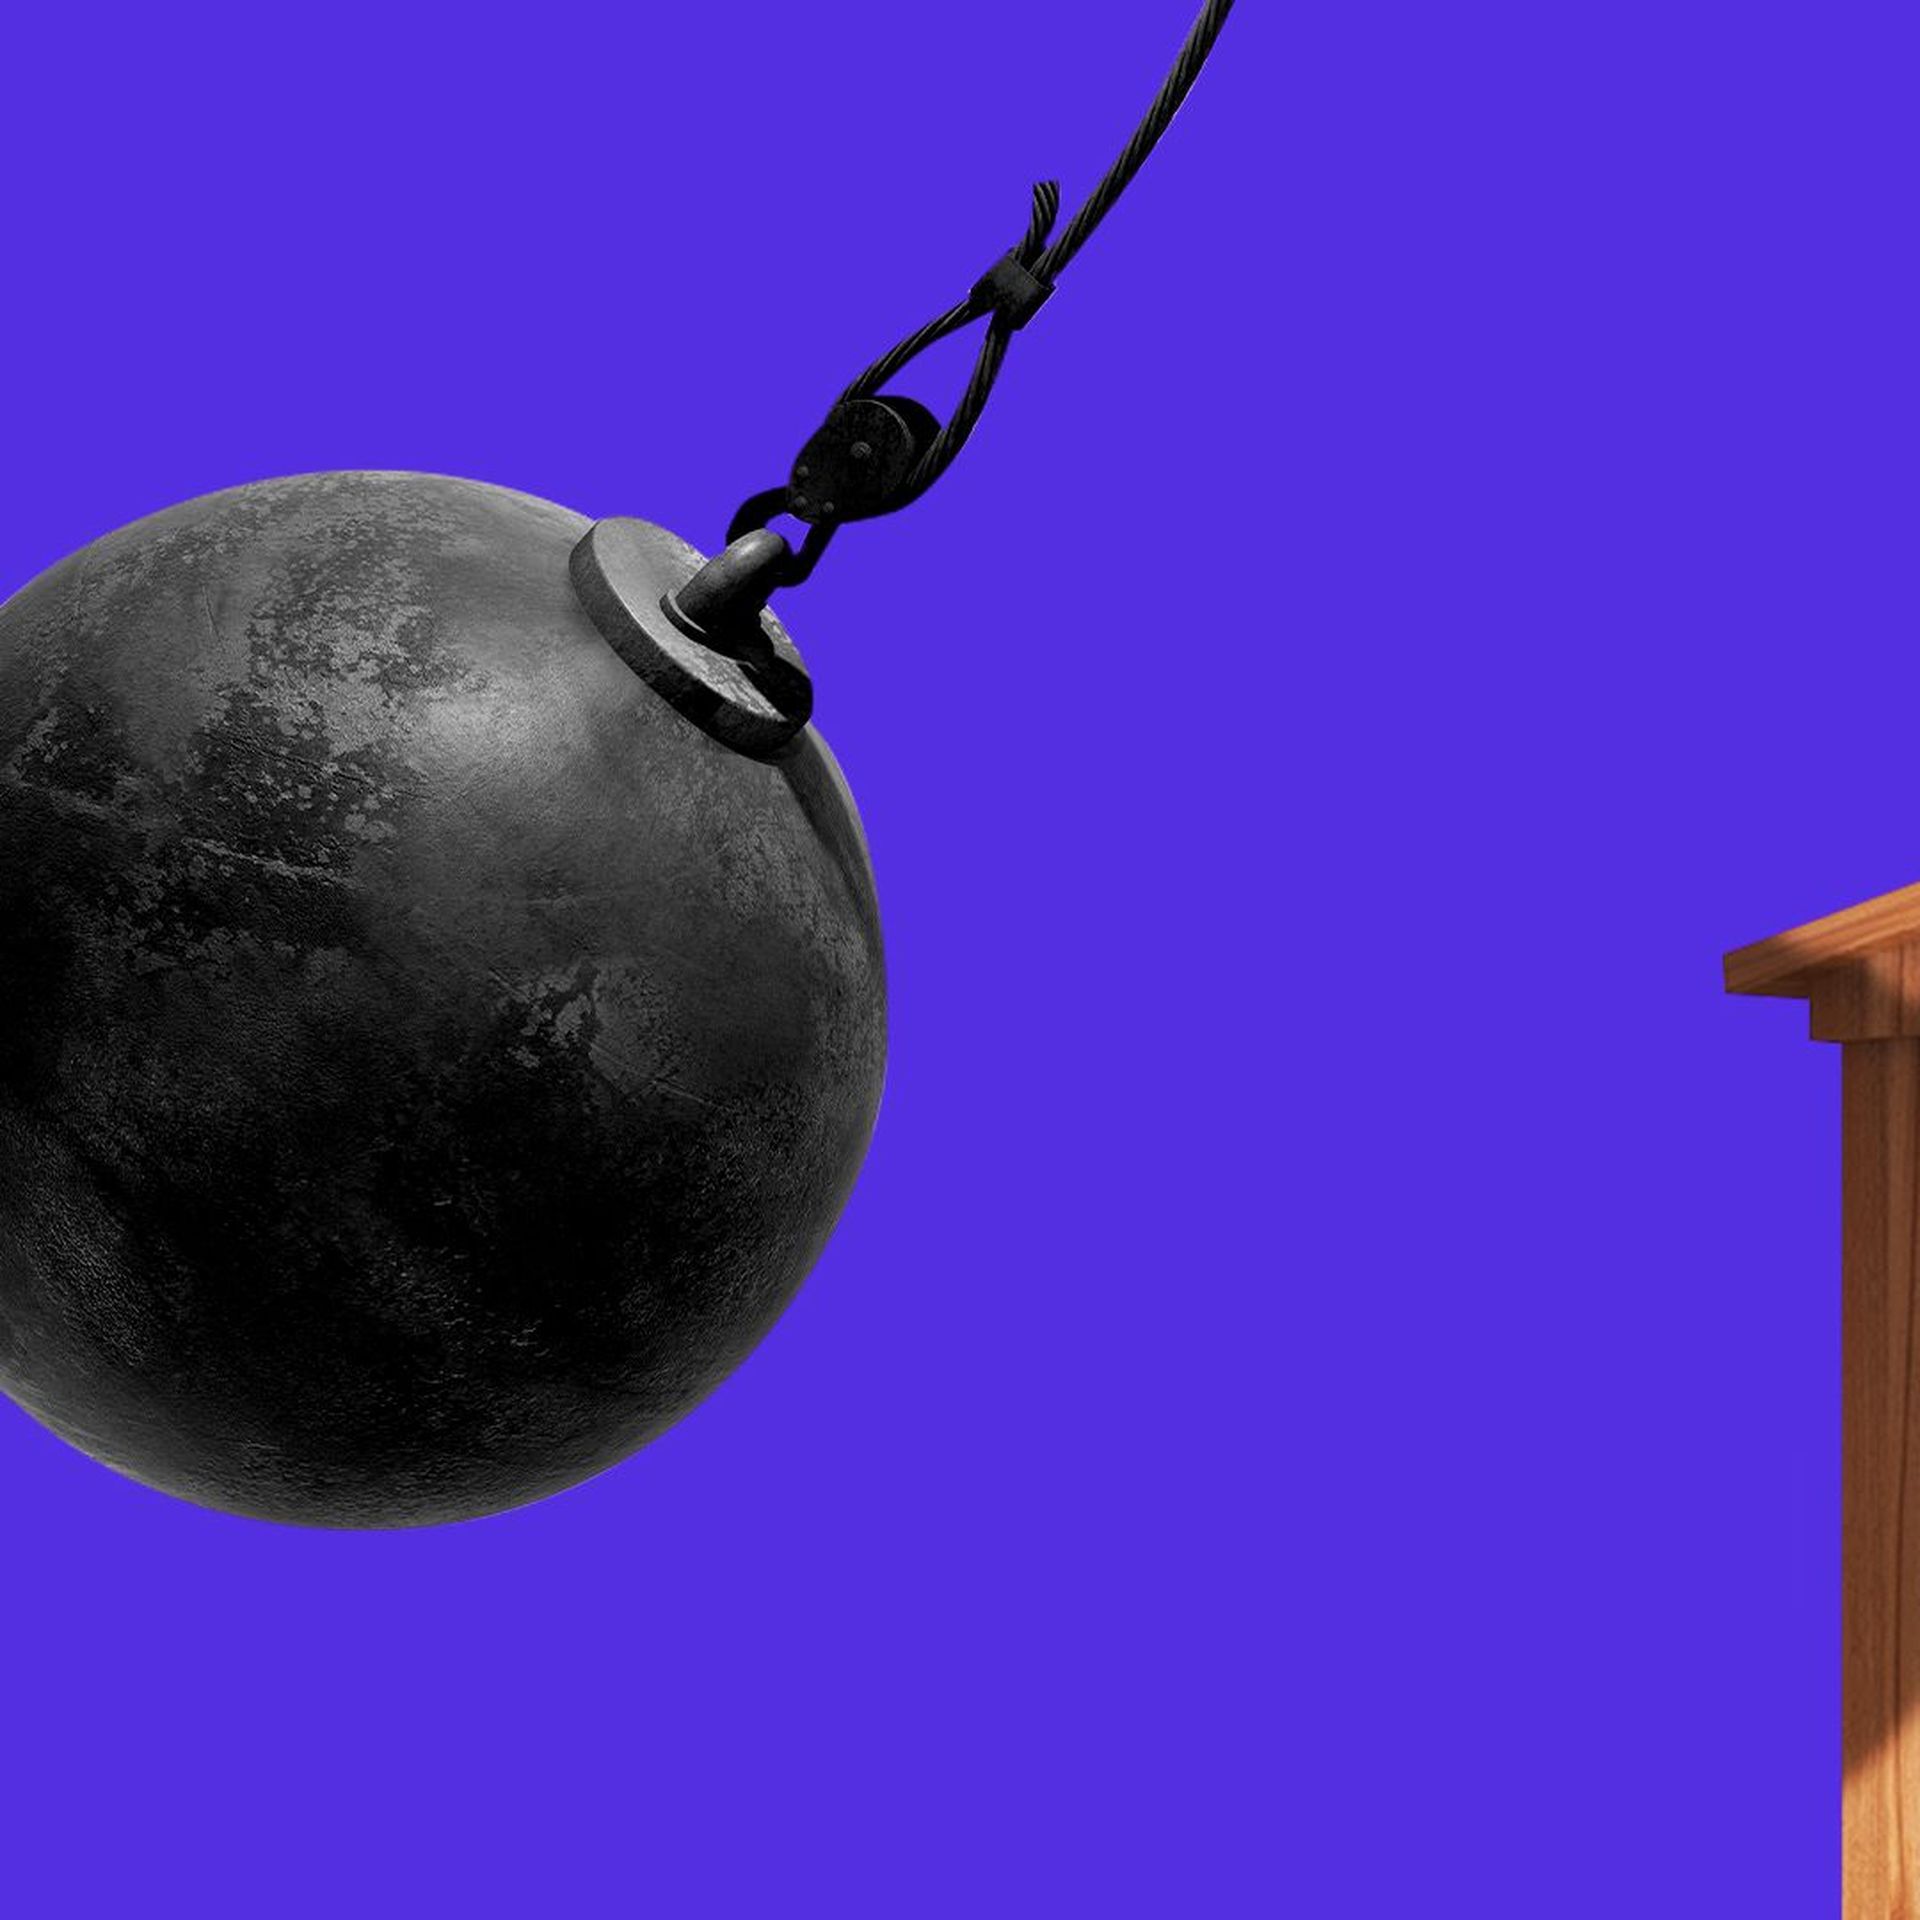 Illustration of a wrecking ball swinging towards an empty podium. 